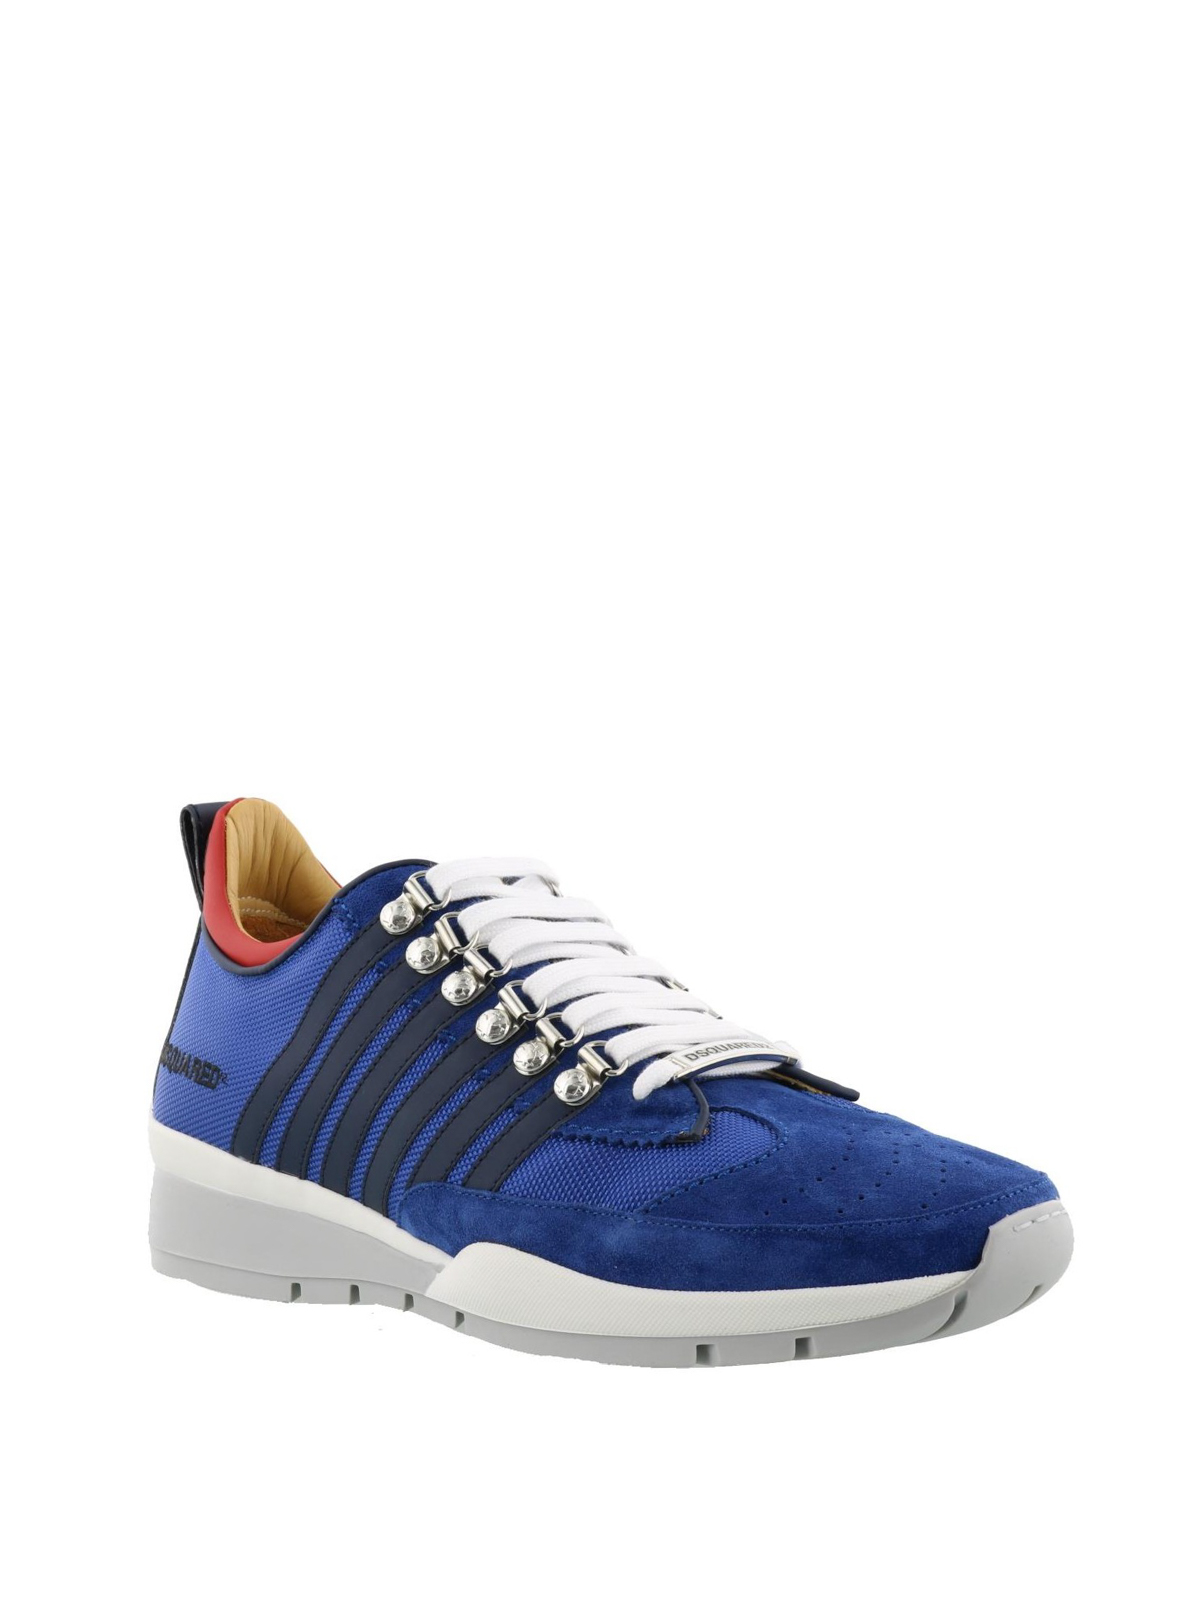 Dsquared2 - 251 royal blue sneakers 